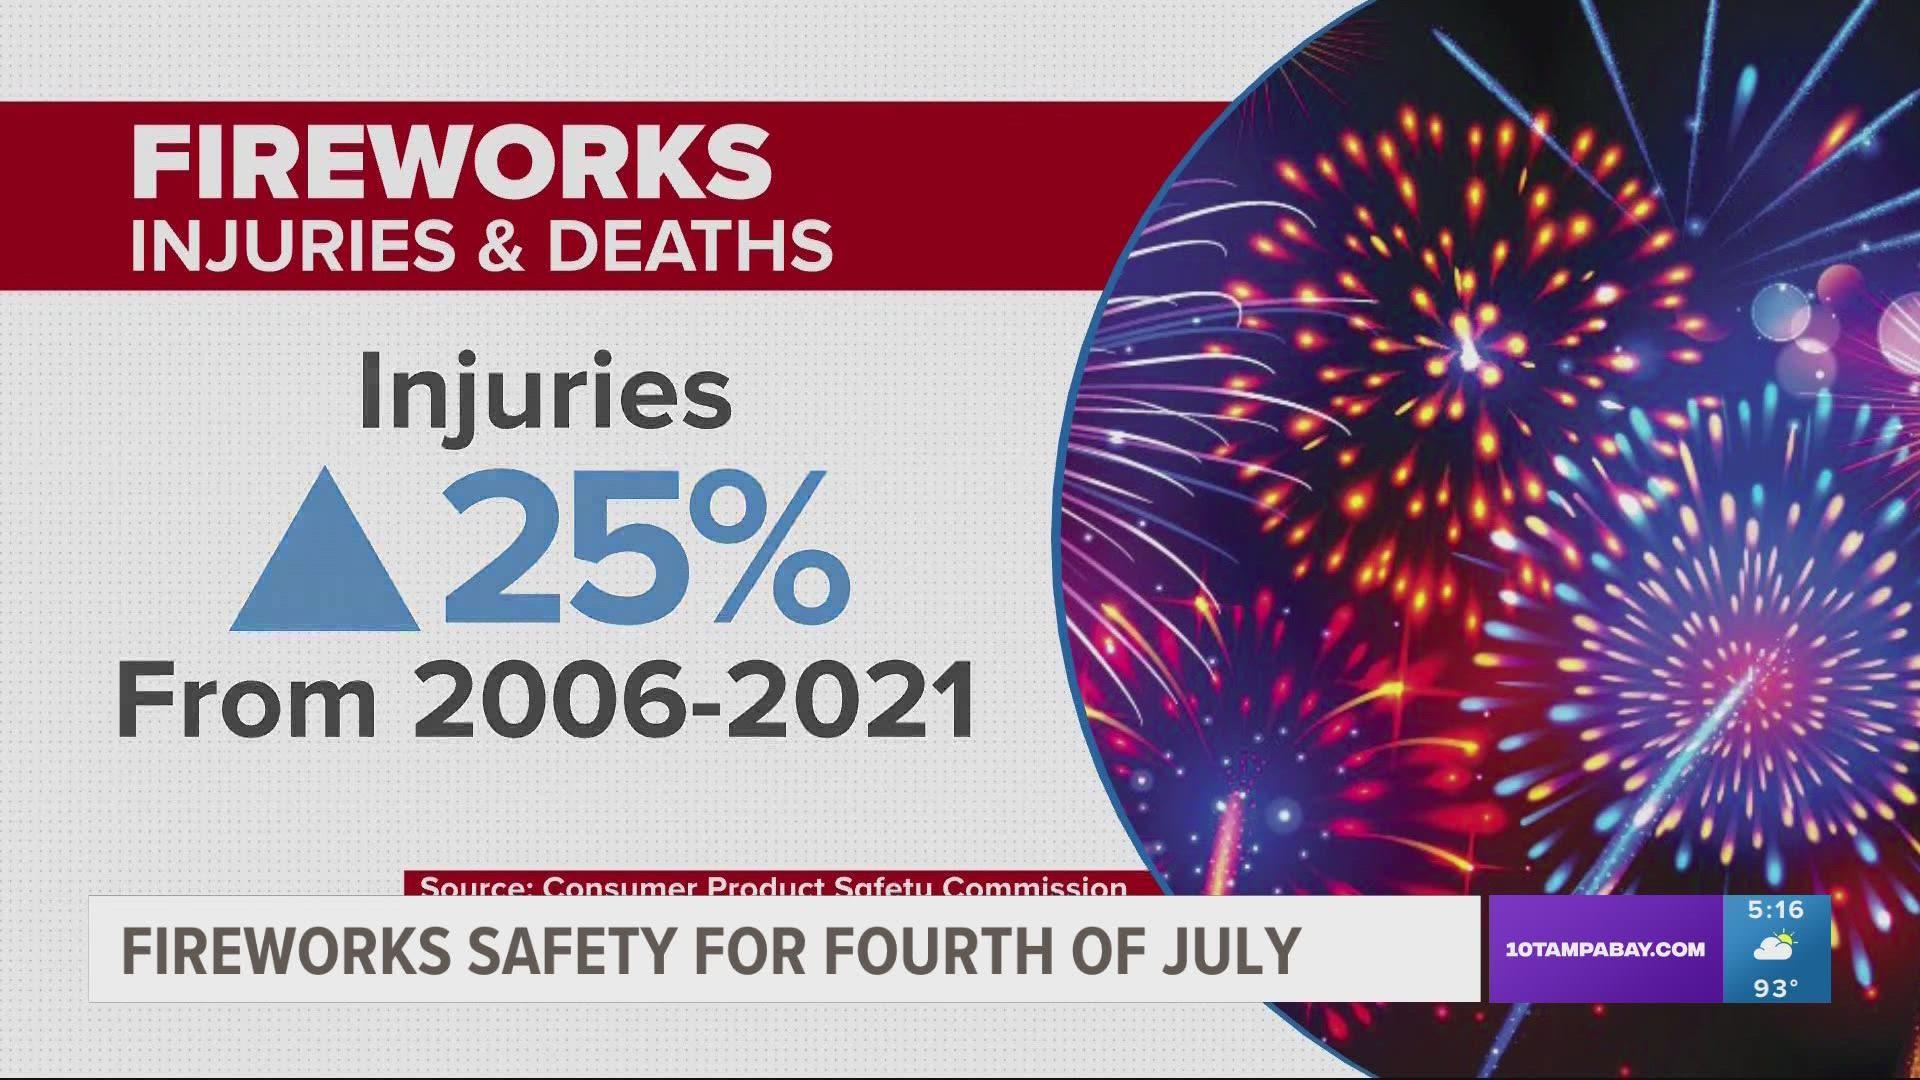 The federal report found, perhaps unsurprisingly, that the majority of injuries and deaths in the U.S. happen in the month around the 4th of July.